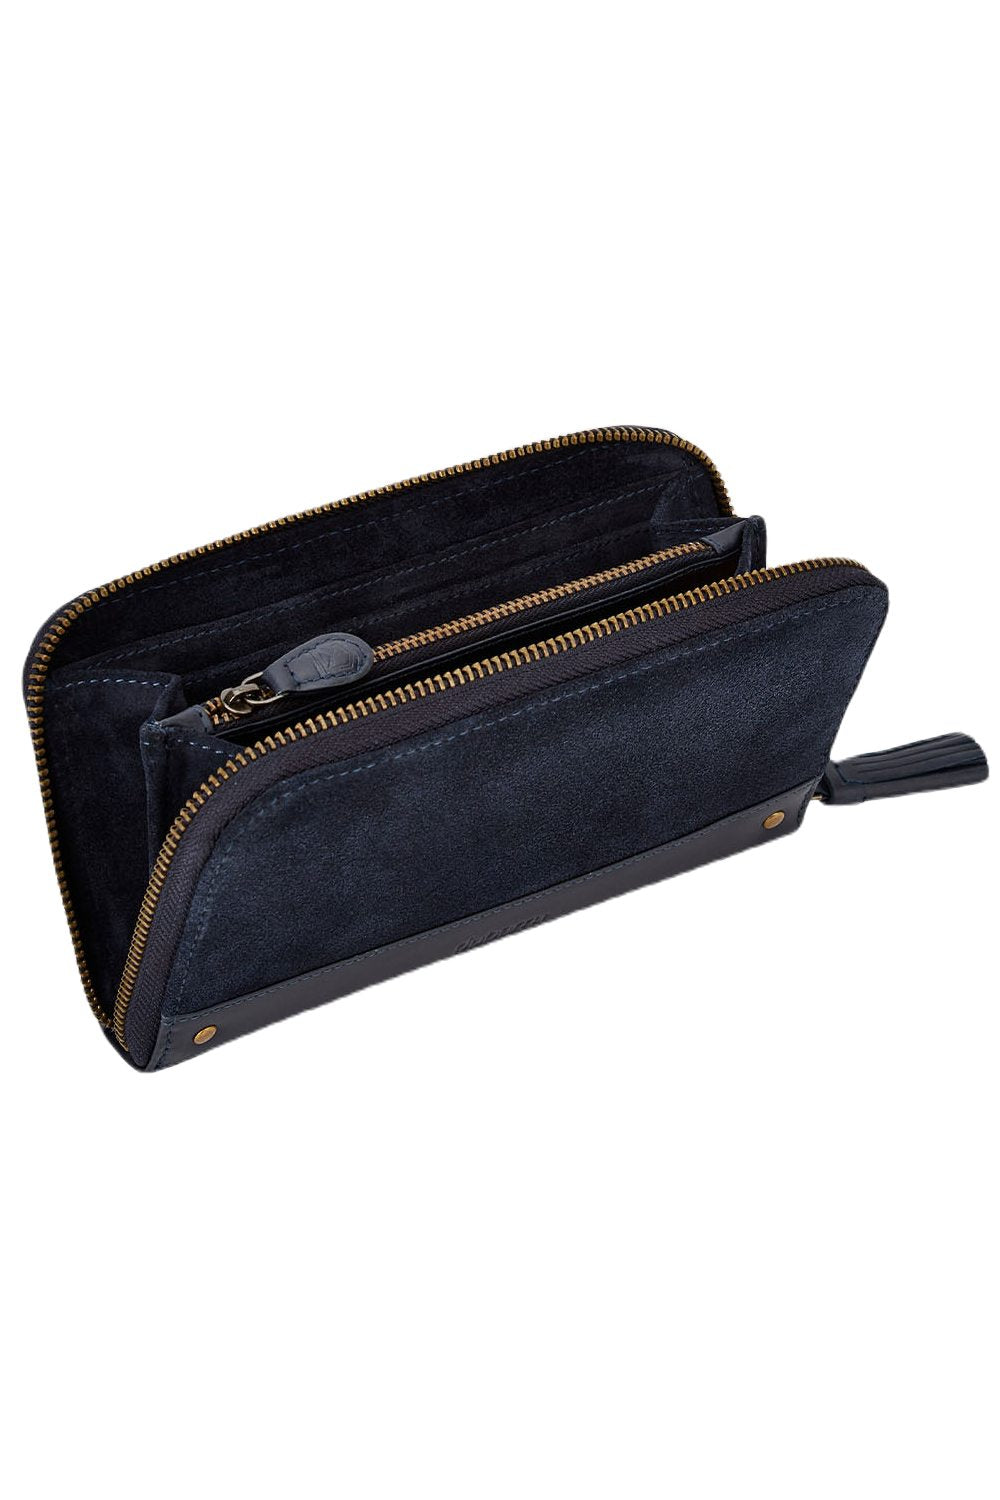 Dubarry Northbrook Suede Purse in French Navy